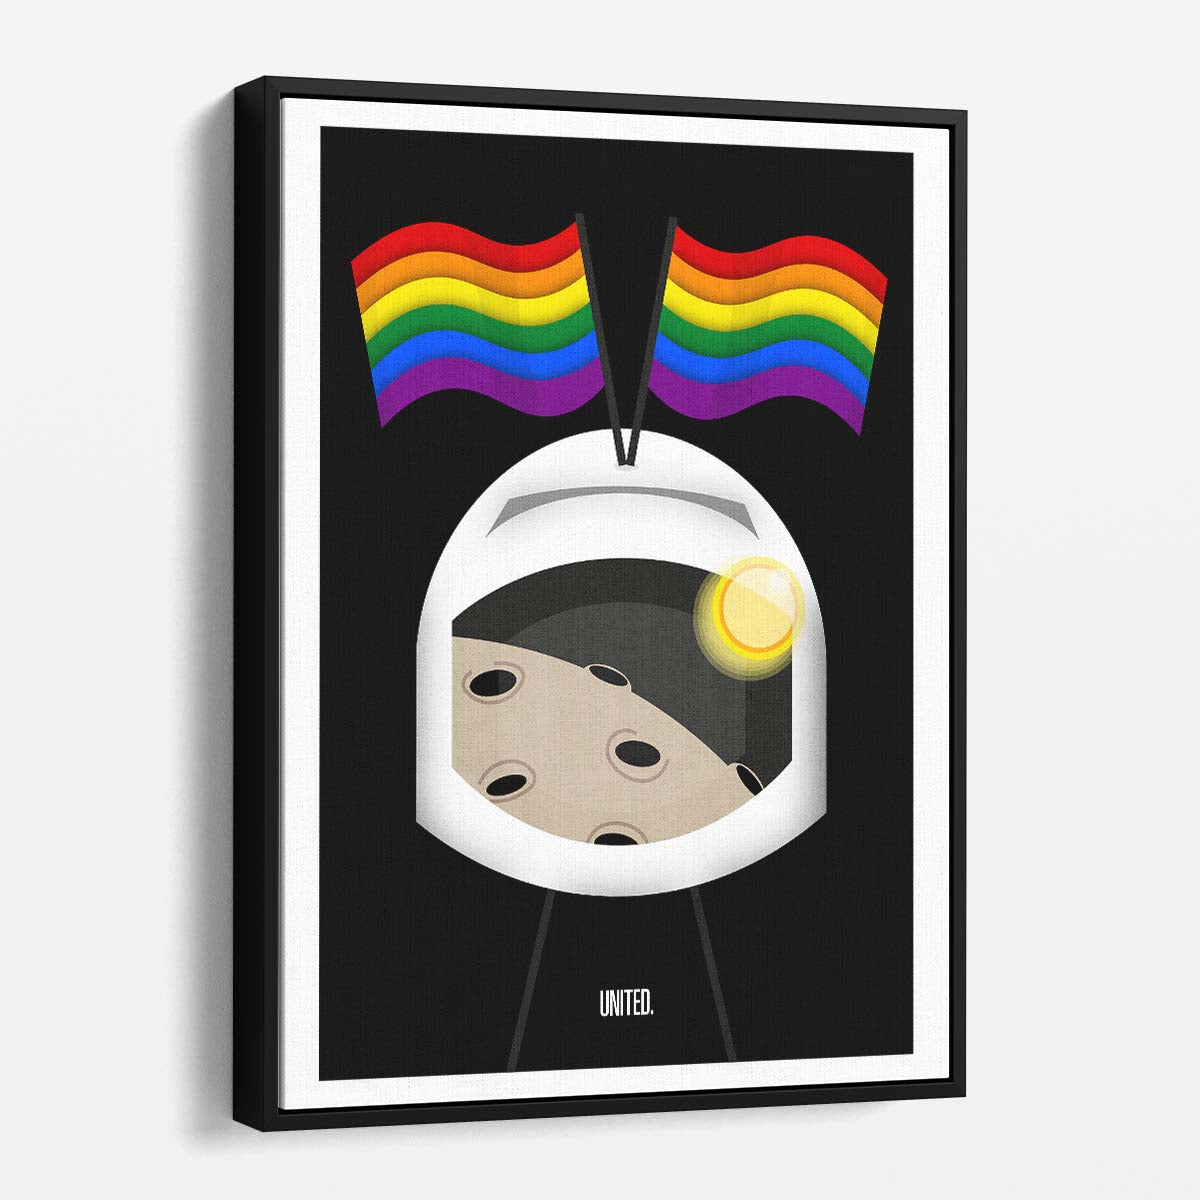 Inspirational LGBT Astronaut Helmet Art by Frances Collett by Luxuriance Designs, made in USA